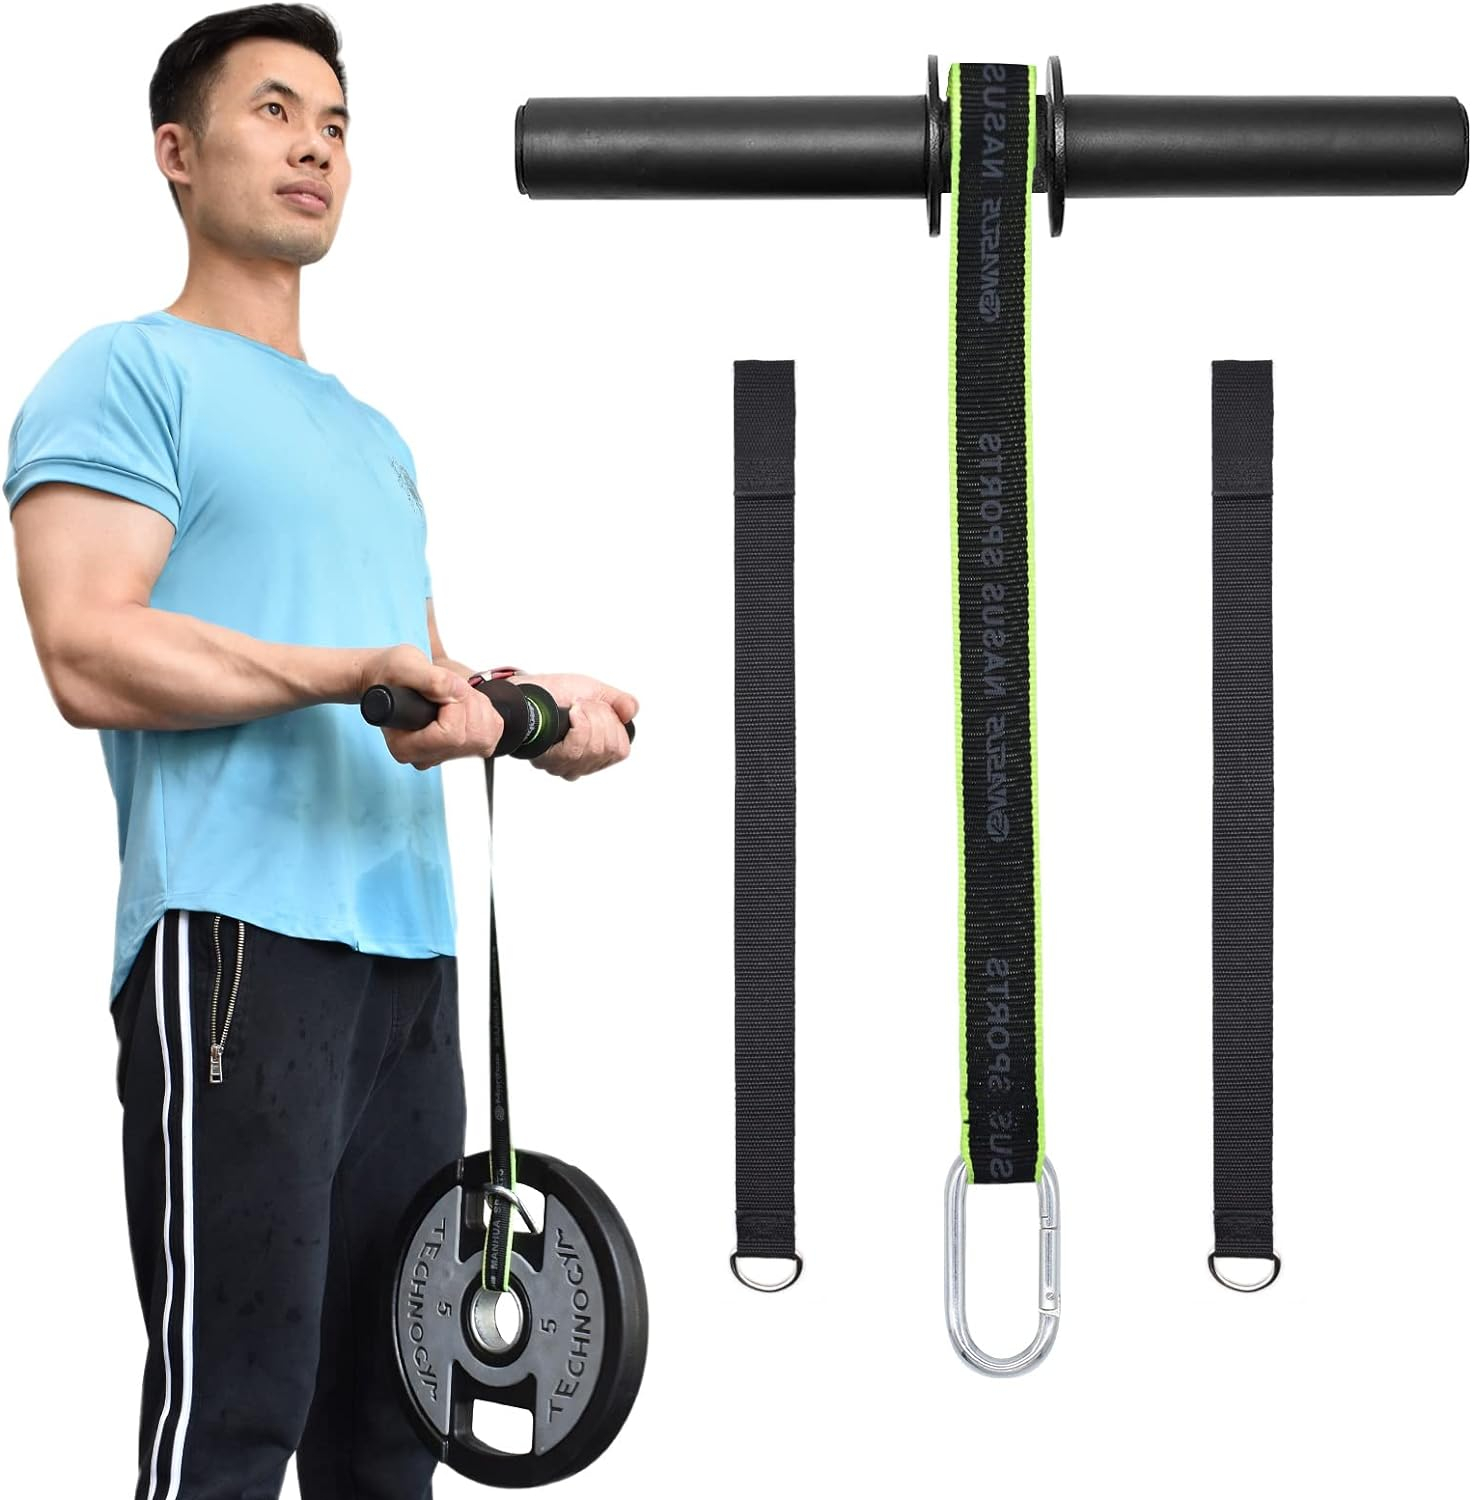 XonyiCos Forearm Wrist Roller Fitness Blaster, Arm Exerciser Wrist Trainer, Forearm Muscle Strength Workouts Tools, Weight Bearing Rope Roller Equipment With Non Slip Cushion, Rope For Dumbbells